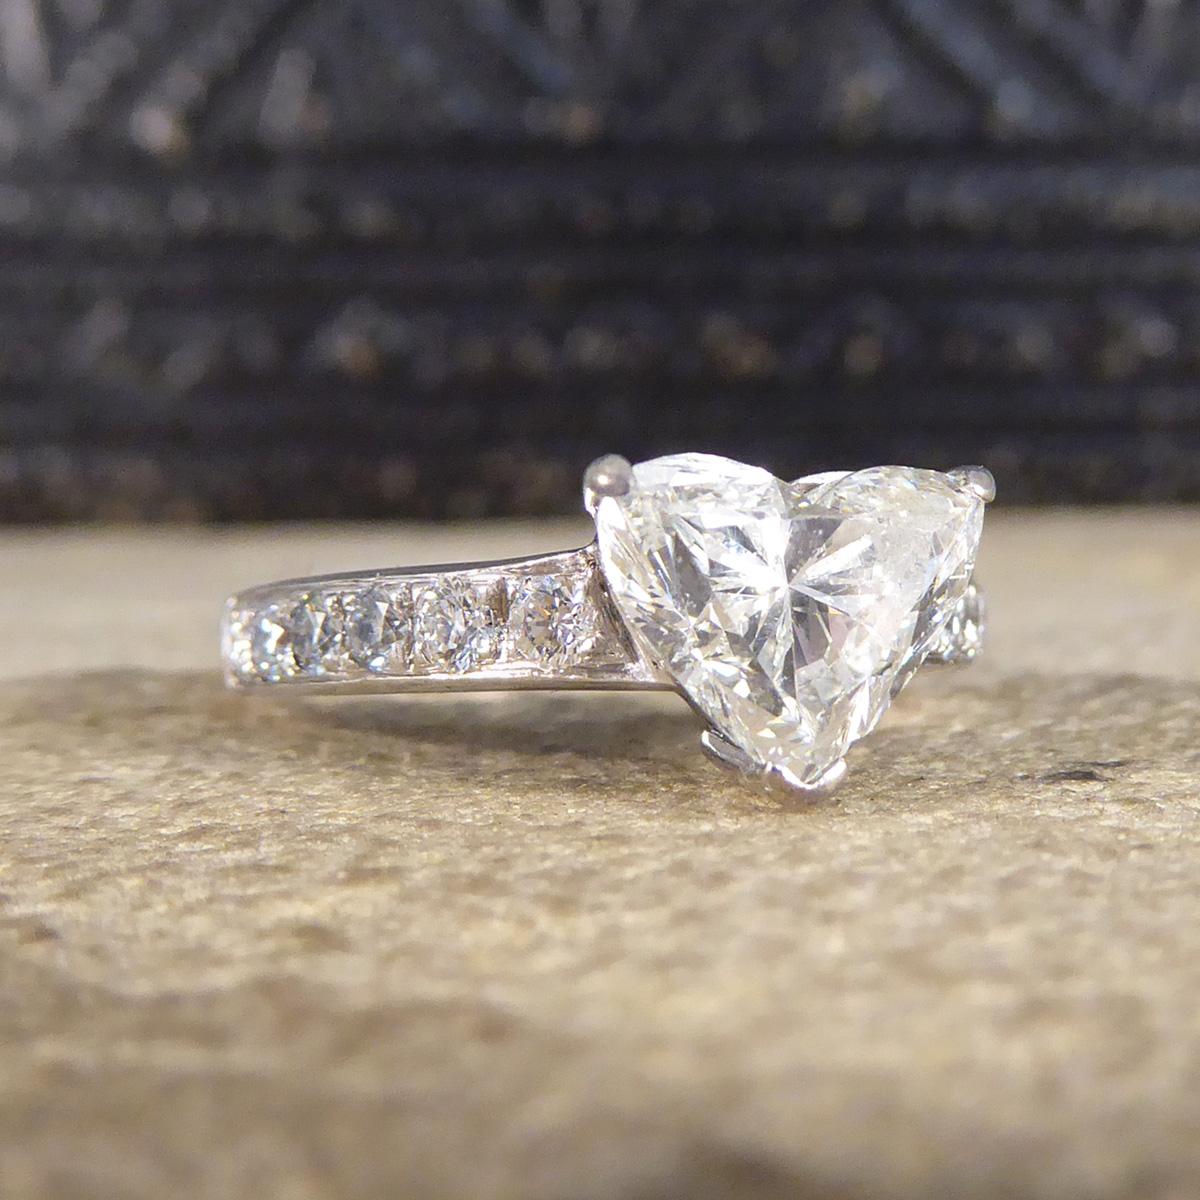 This beautifully sparkly engagement ring holds a bright white and sparkly Heart Cut Diamond weighing 1.51ct in a three point setting. The centre Diamond itself is very high in colour with an independent grading (HRD Gem Cert) of F colour and nil